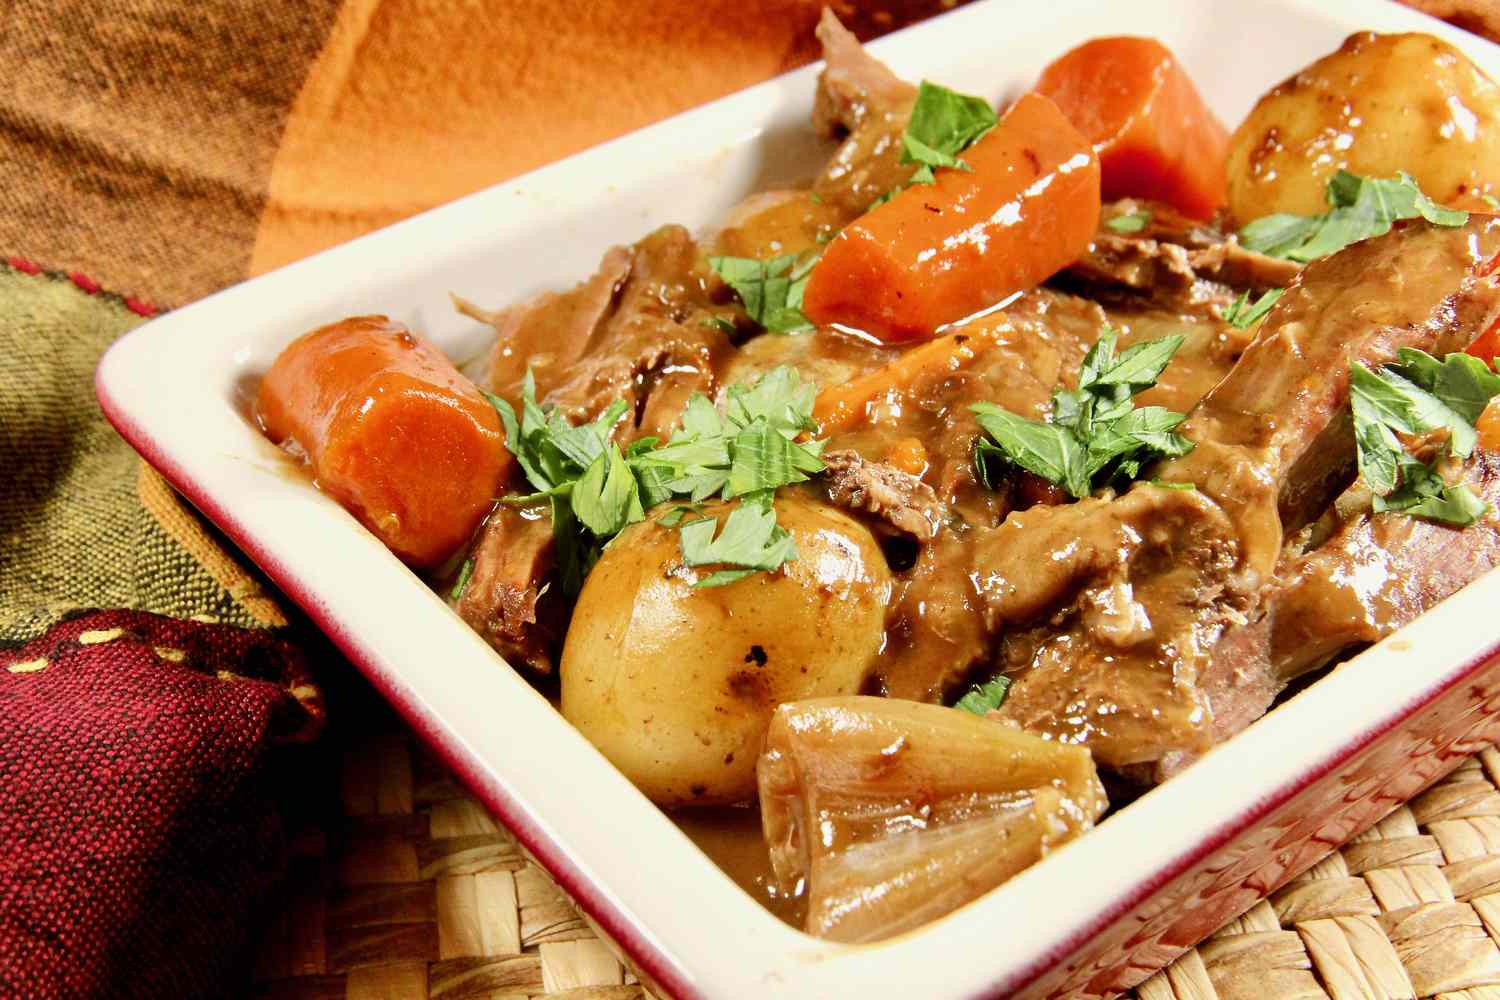 Paula's Dutch Oven Pot Roast Recipe: Best Techniques for a Flavorful, Healthy Meal